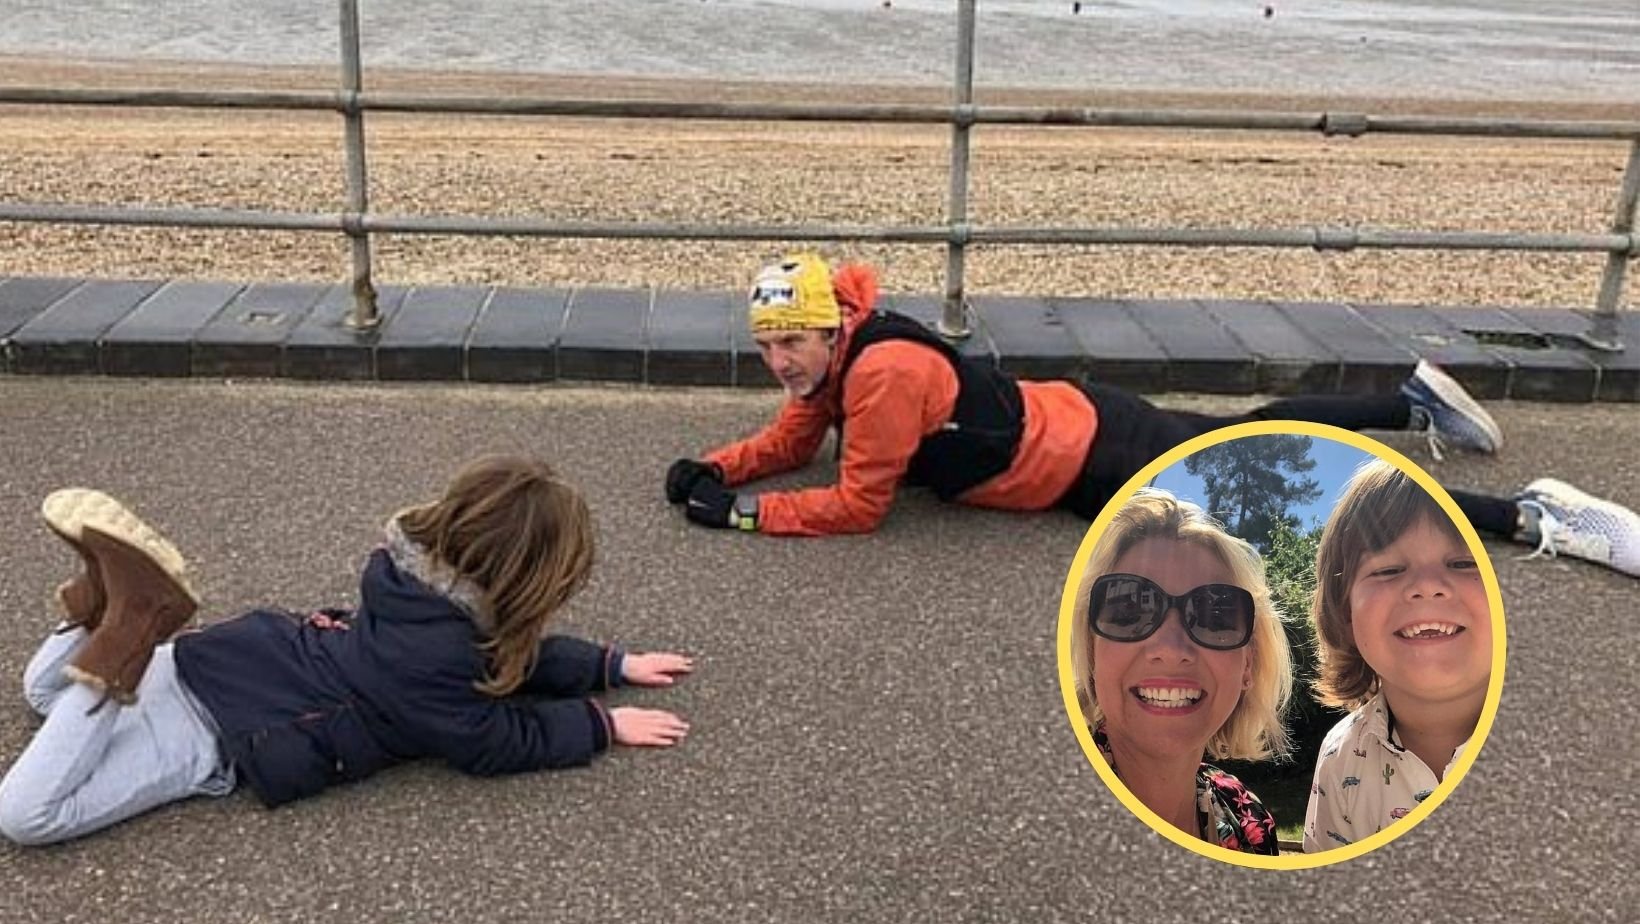 1 72.jpg?resize=1200,630 - Mom Praises ‘Hero’ Passerby For Lying On The Floor To Stop Her Autistic Son From Having A Meltdown